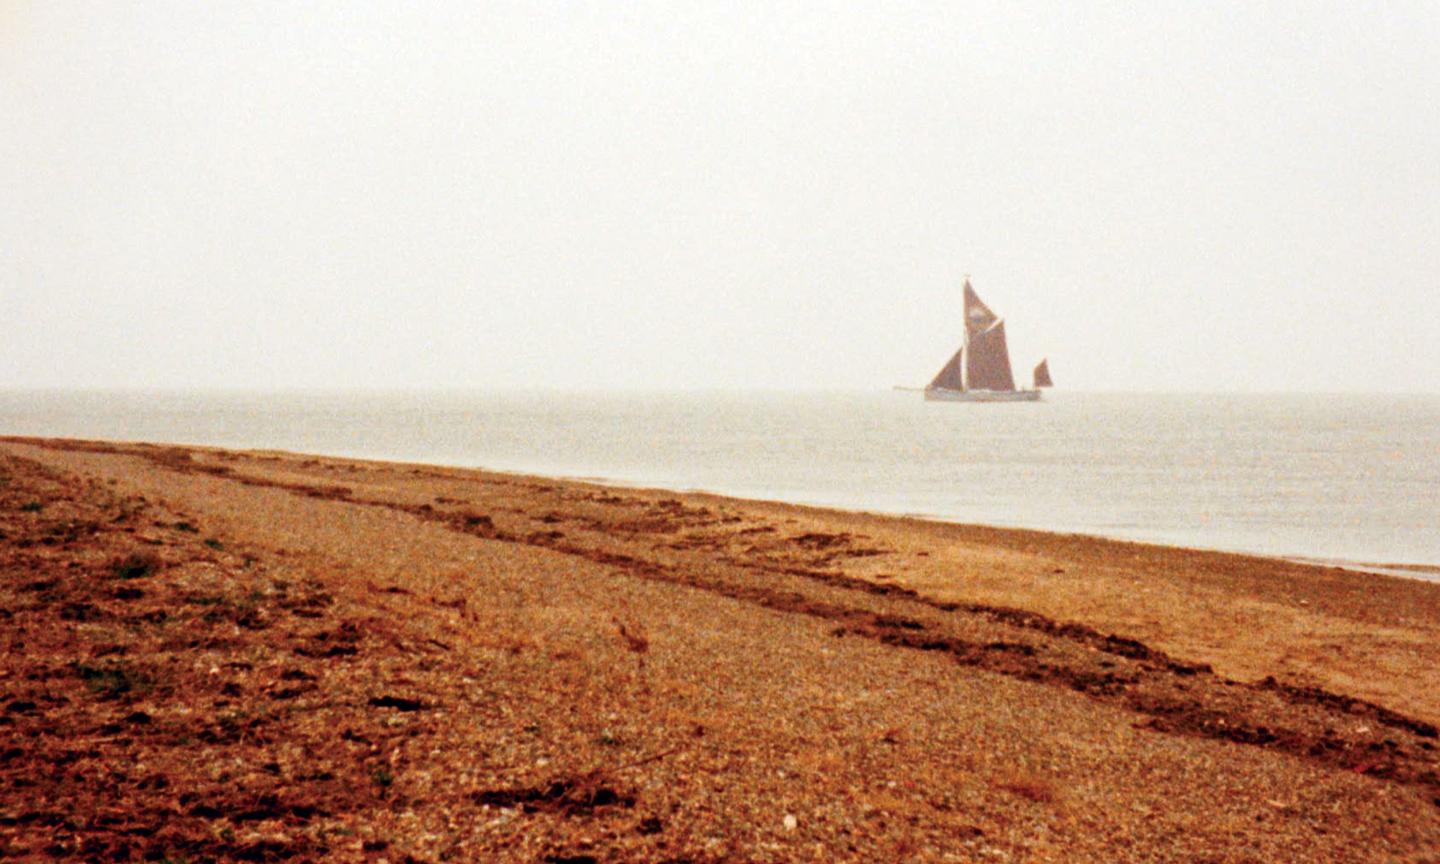 The foreground is a long brown beach with a vessel Thames sailing barge Blue Mermaid sailing in the distance, with four red sails. 